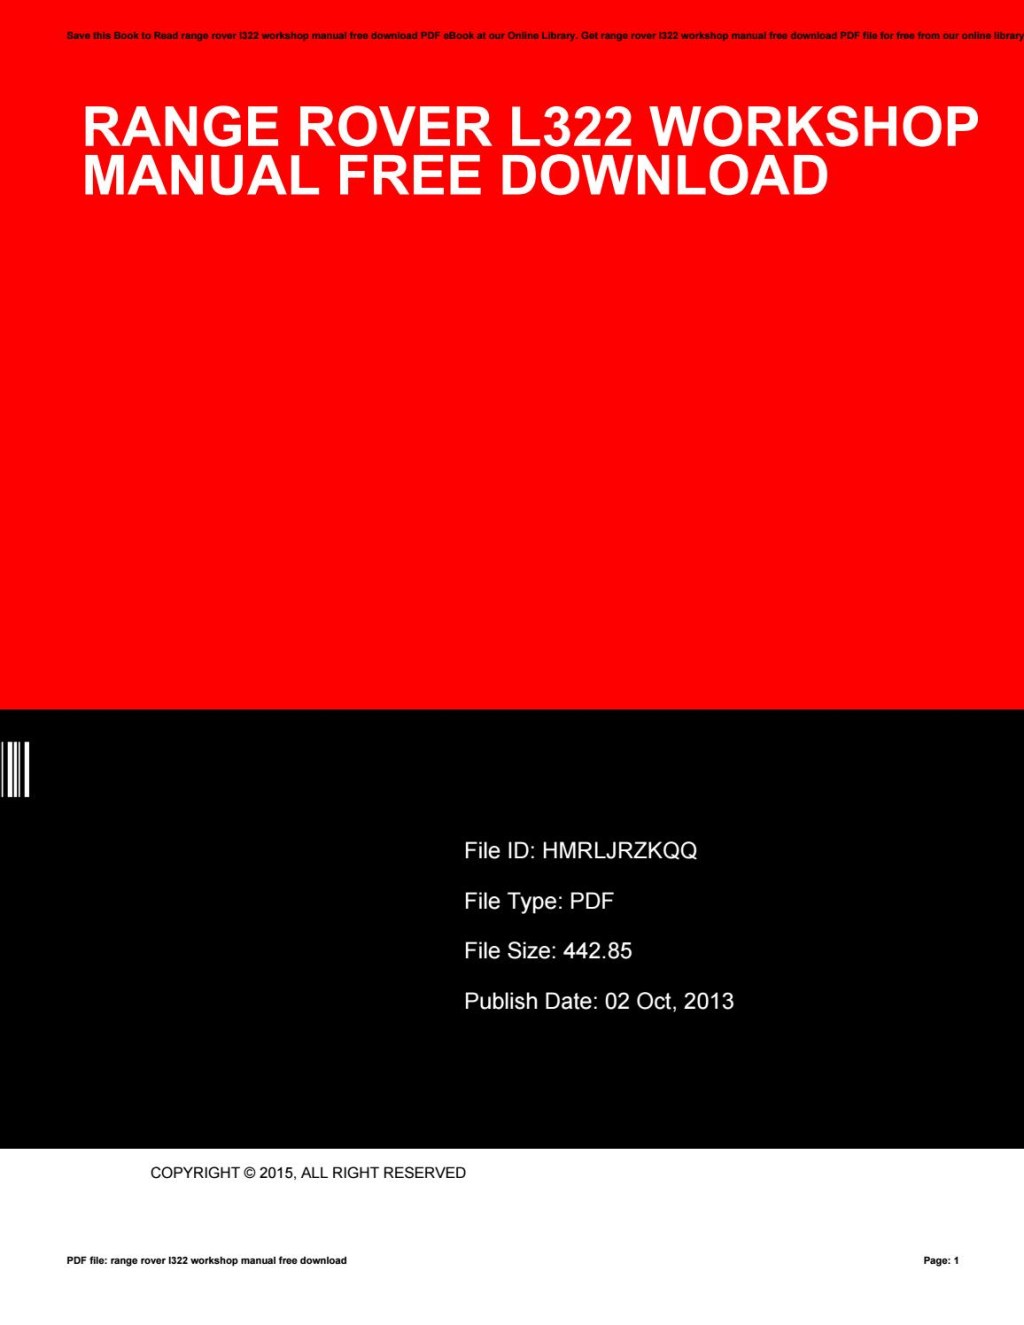 Picture of: Range rover l workshop manual free download by e – Issuu